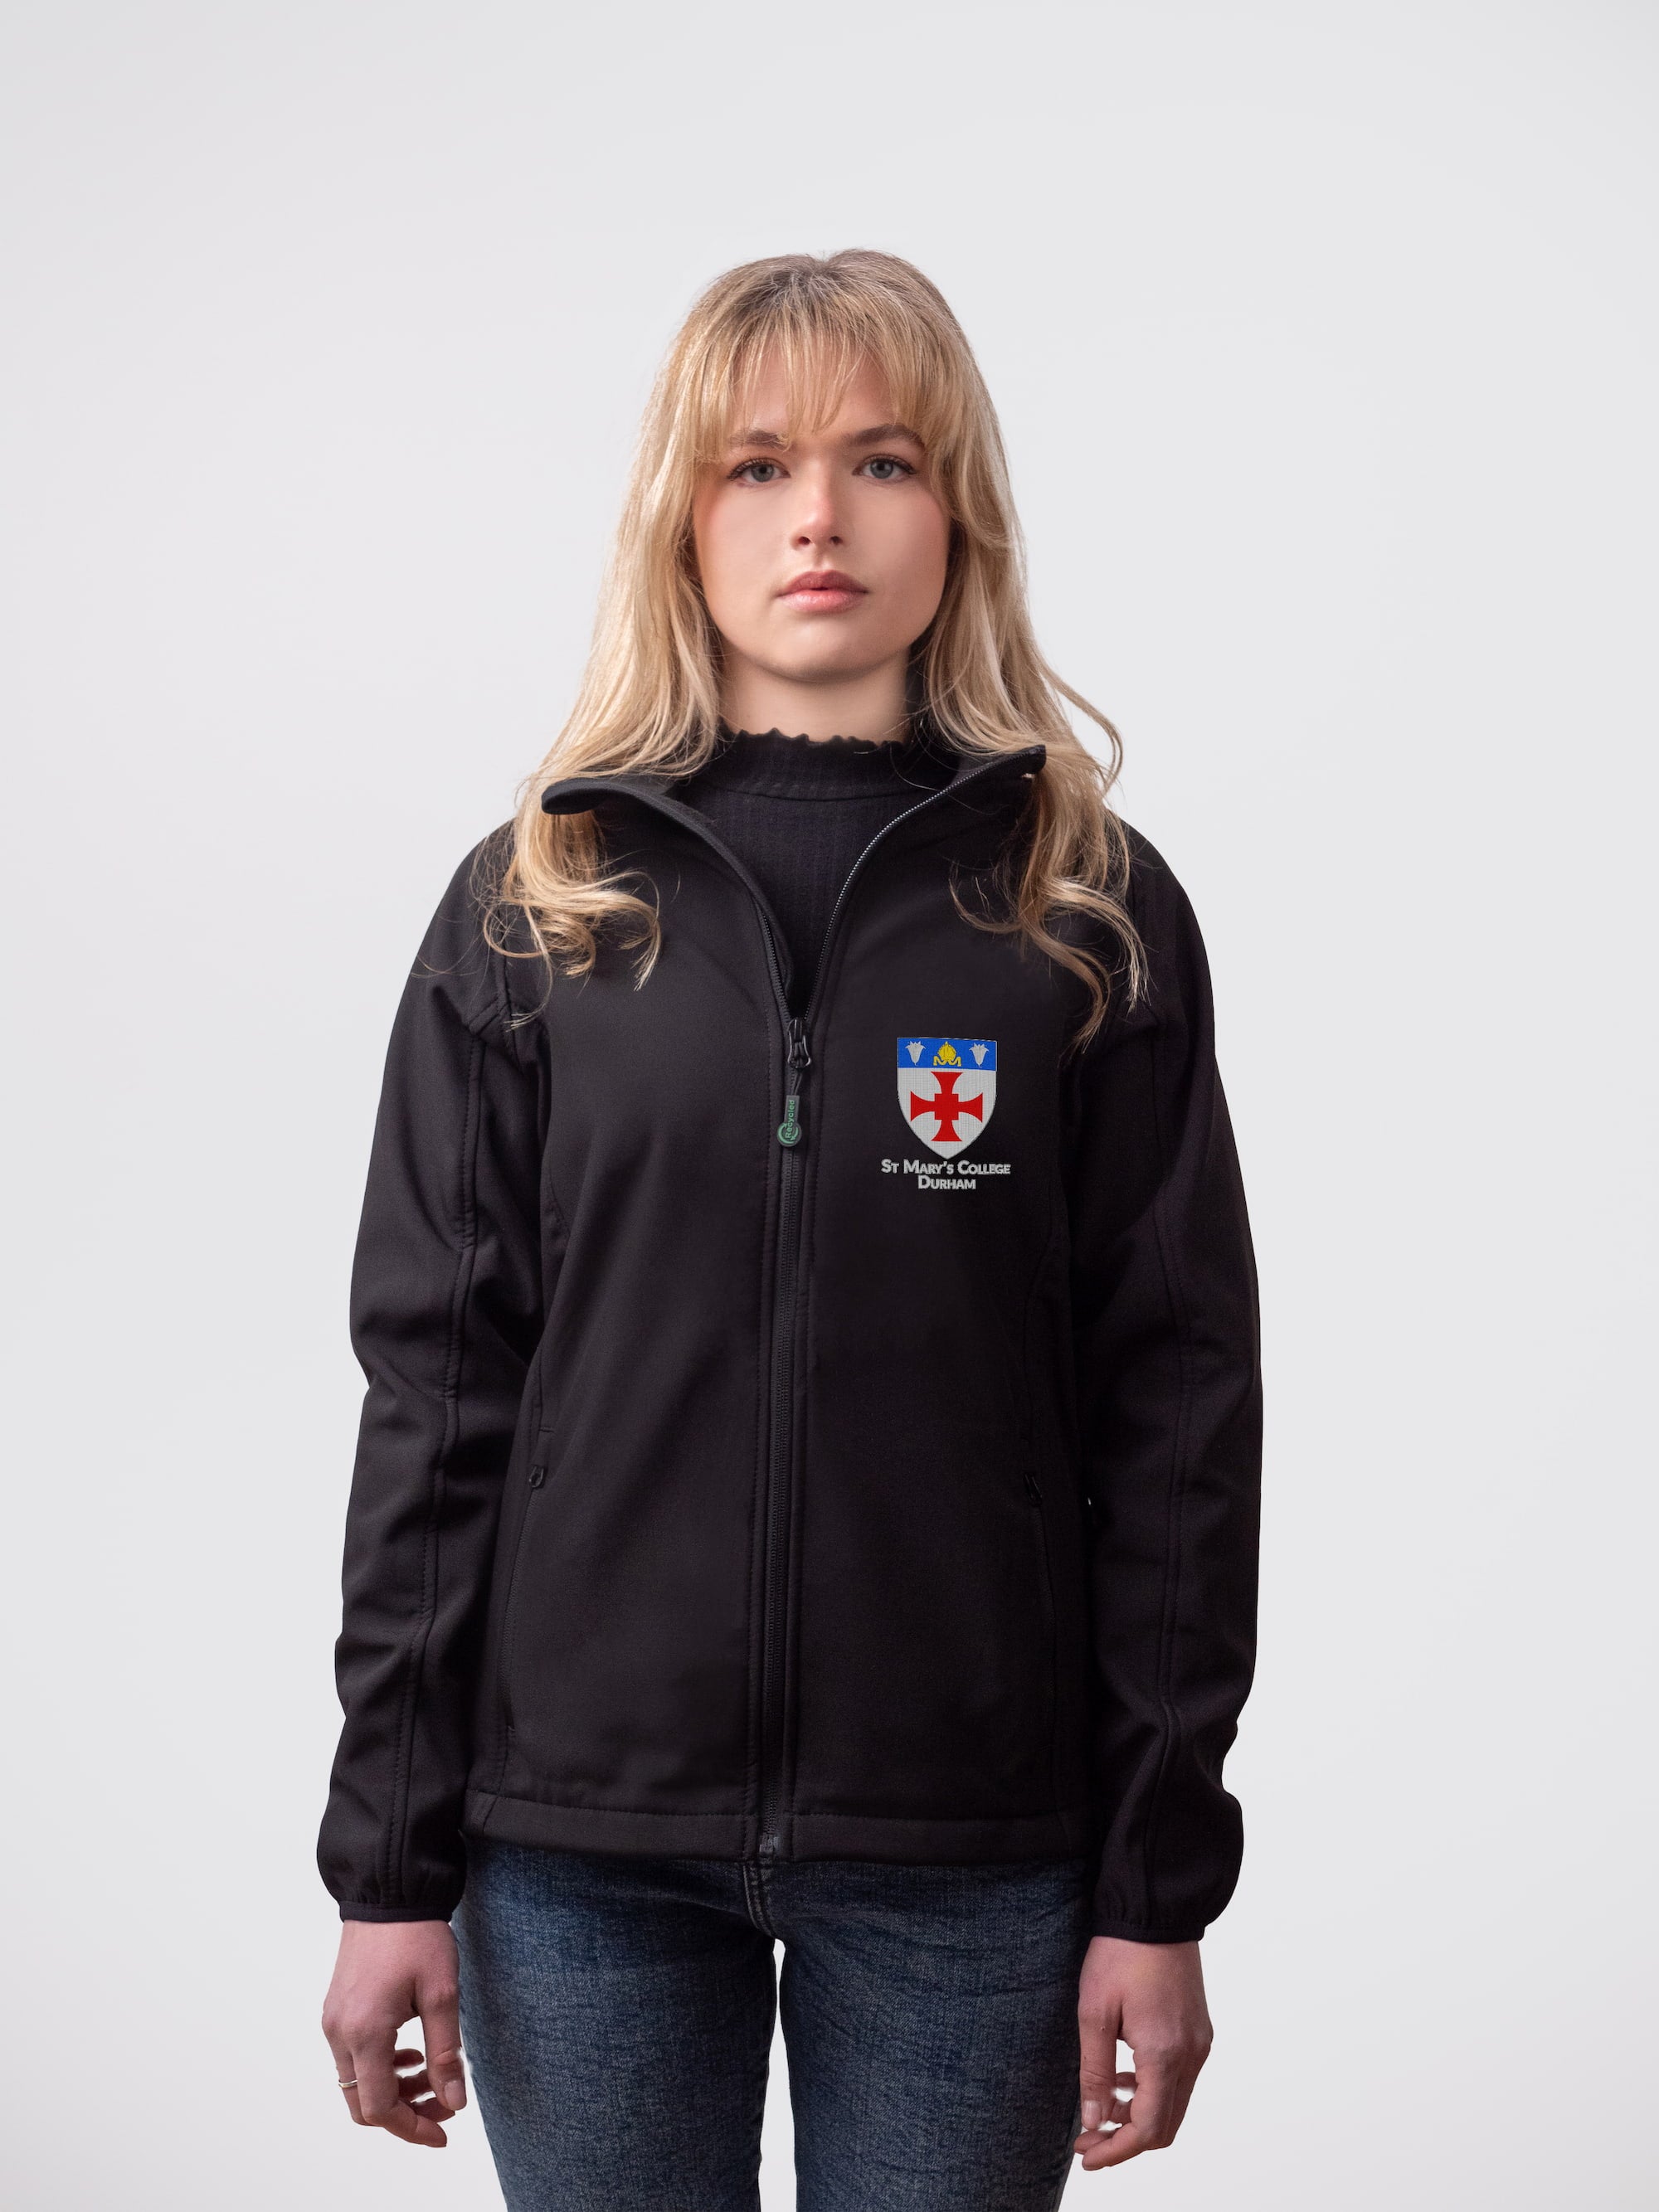 A student wearing a sustainable, St Mary's College embroidered jacket